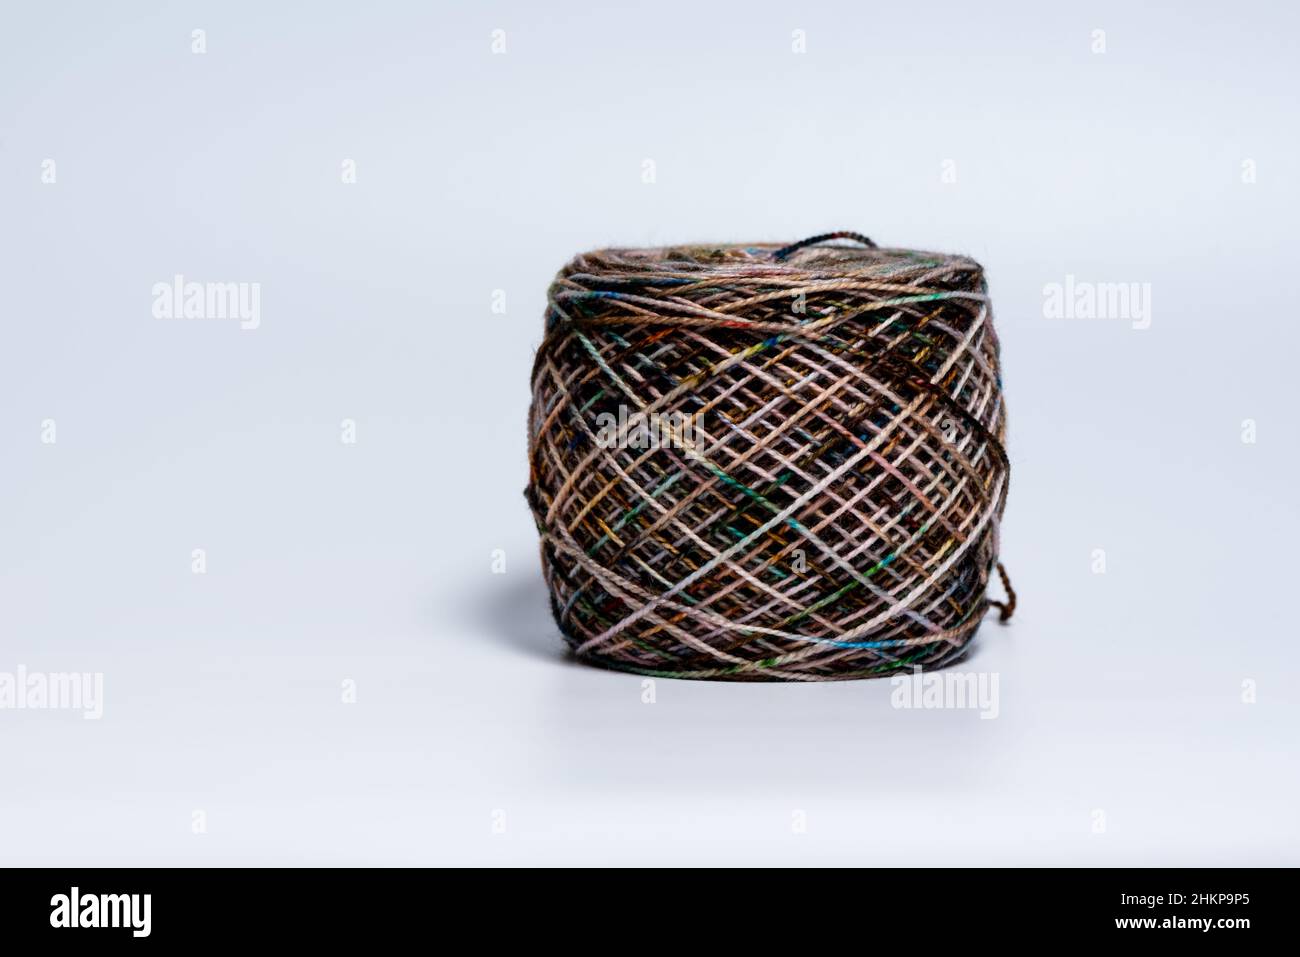 Single skein ball of yarn with variegated colors on white background Stock Photo